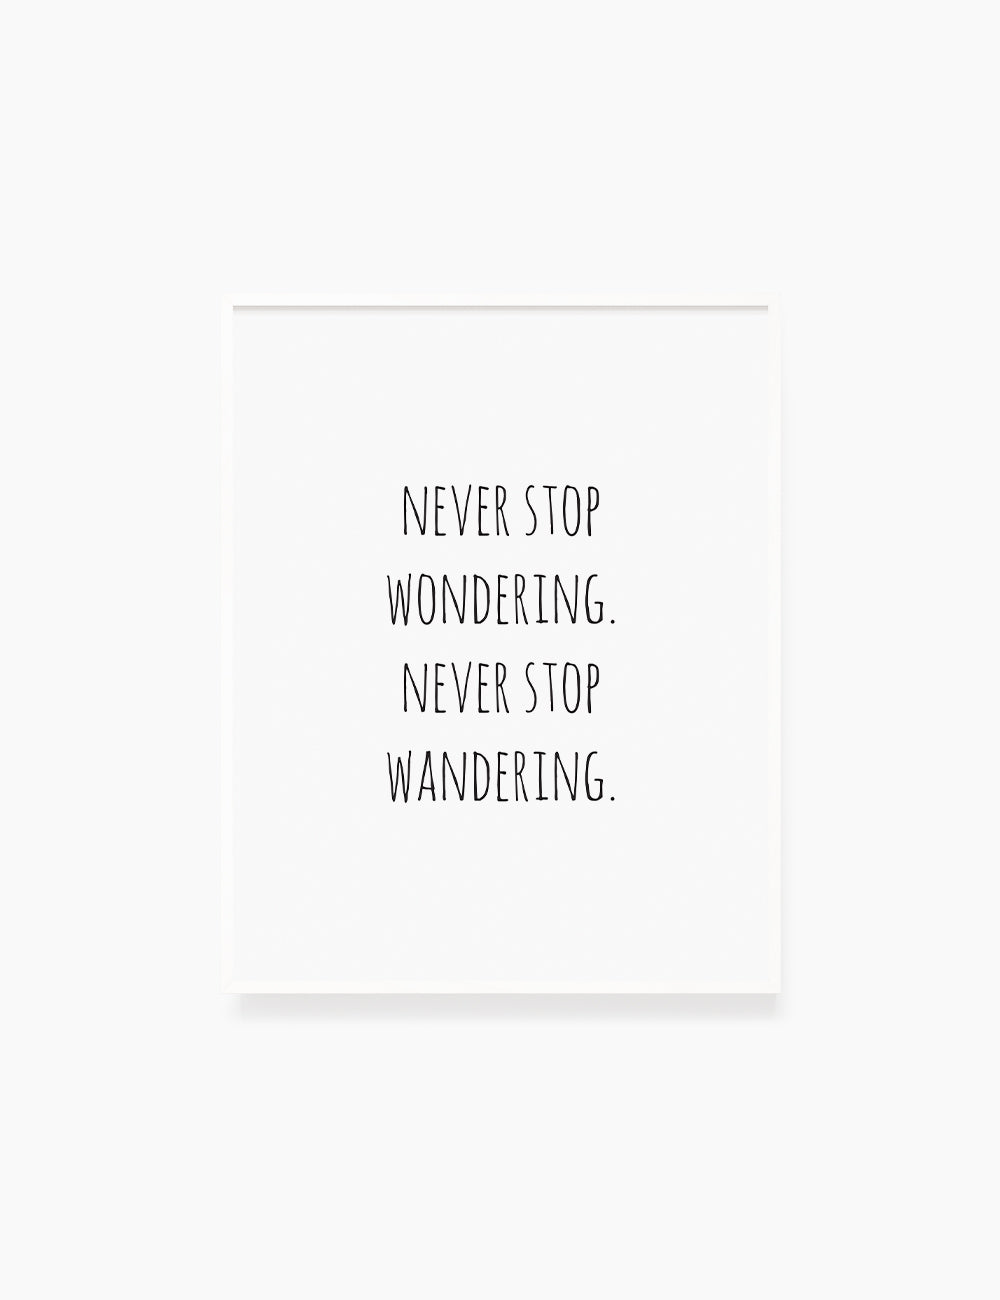 Printable Wall Art Quote: NEVER STOP WANDERING. Printable Poster. Inspirational Quote. Motivational Quote. WA015 - Paper Moon Art & Design